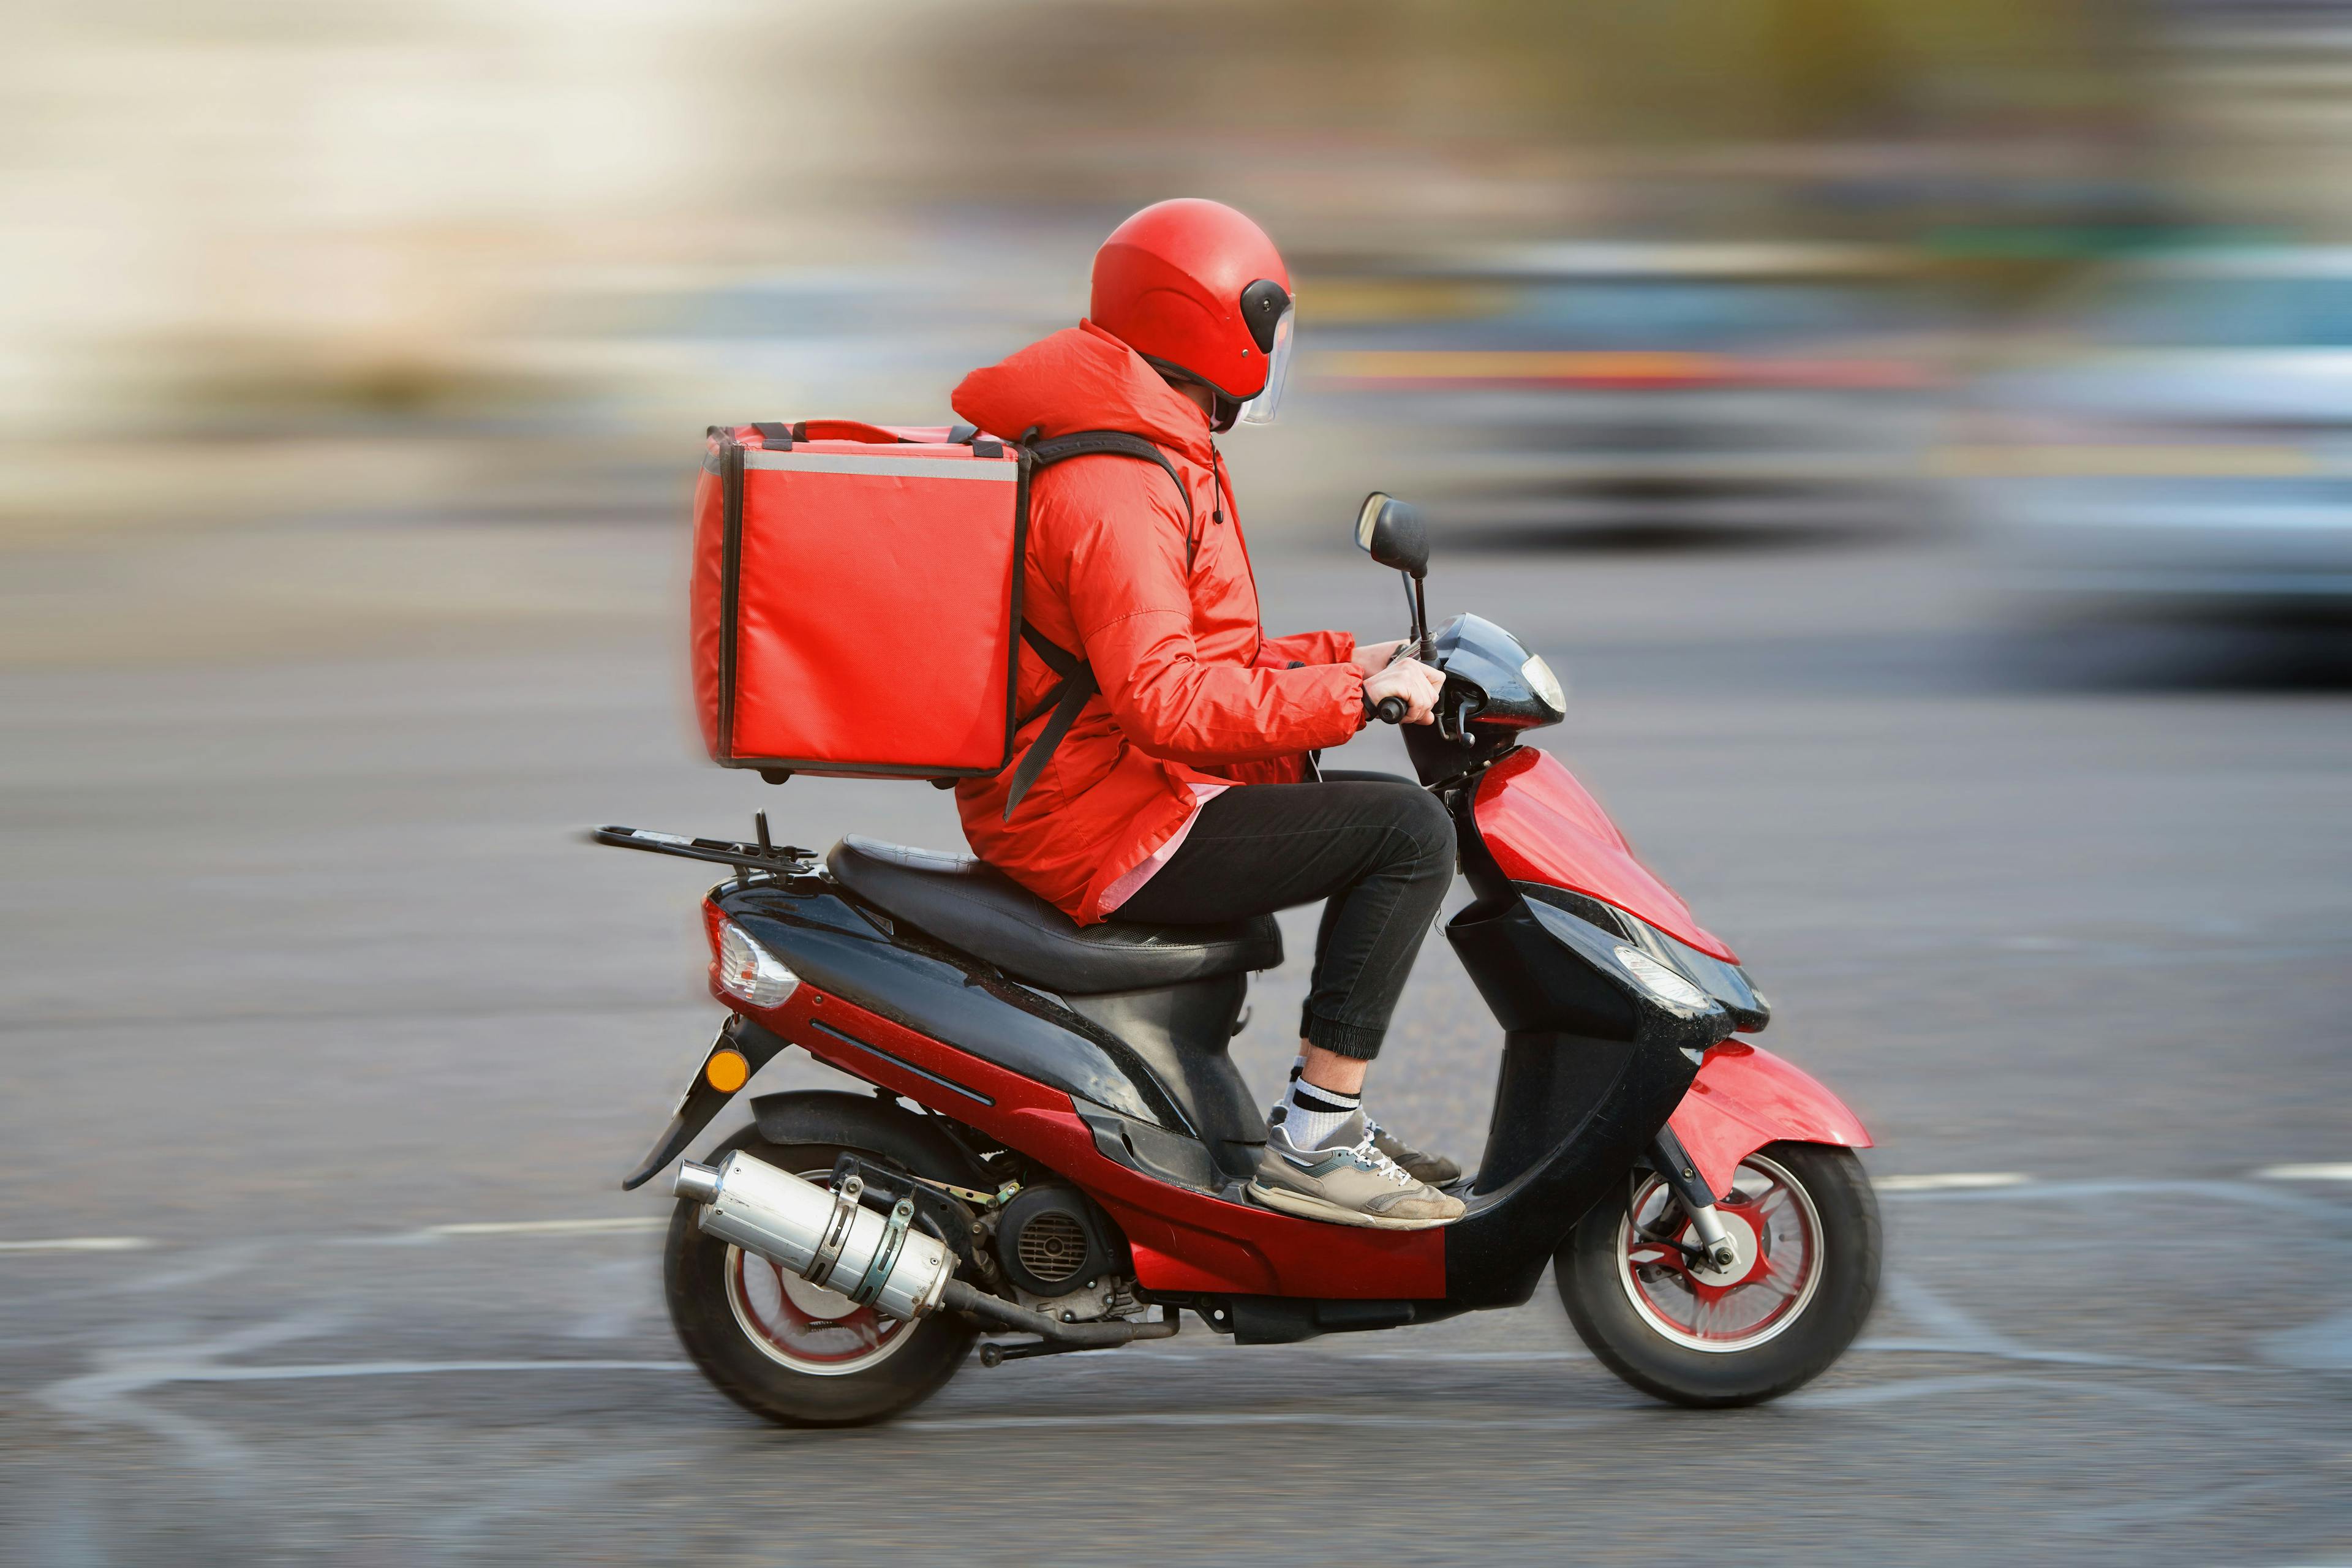 A man wearing a red jacket rides a scooter, transporting a box for delivery.